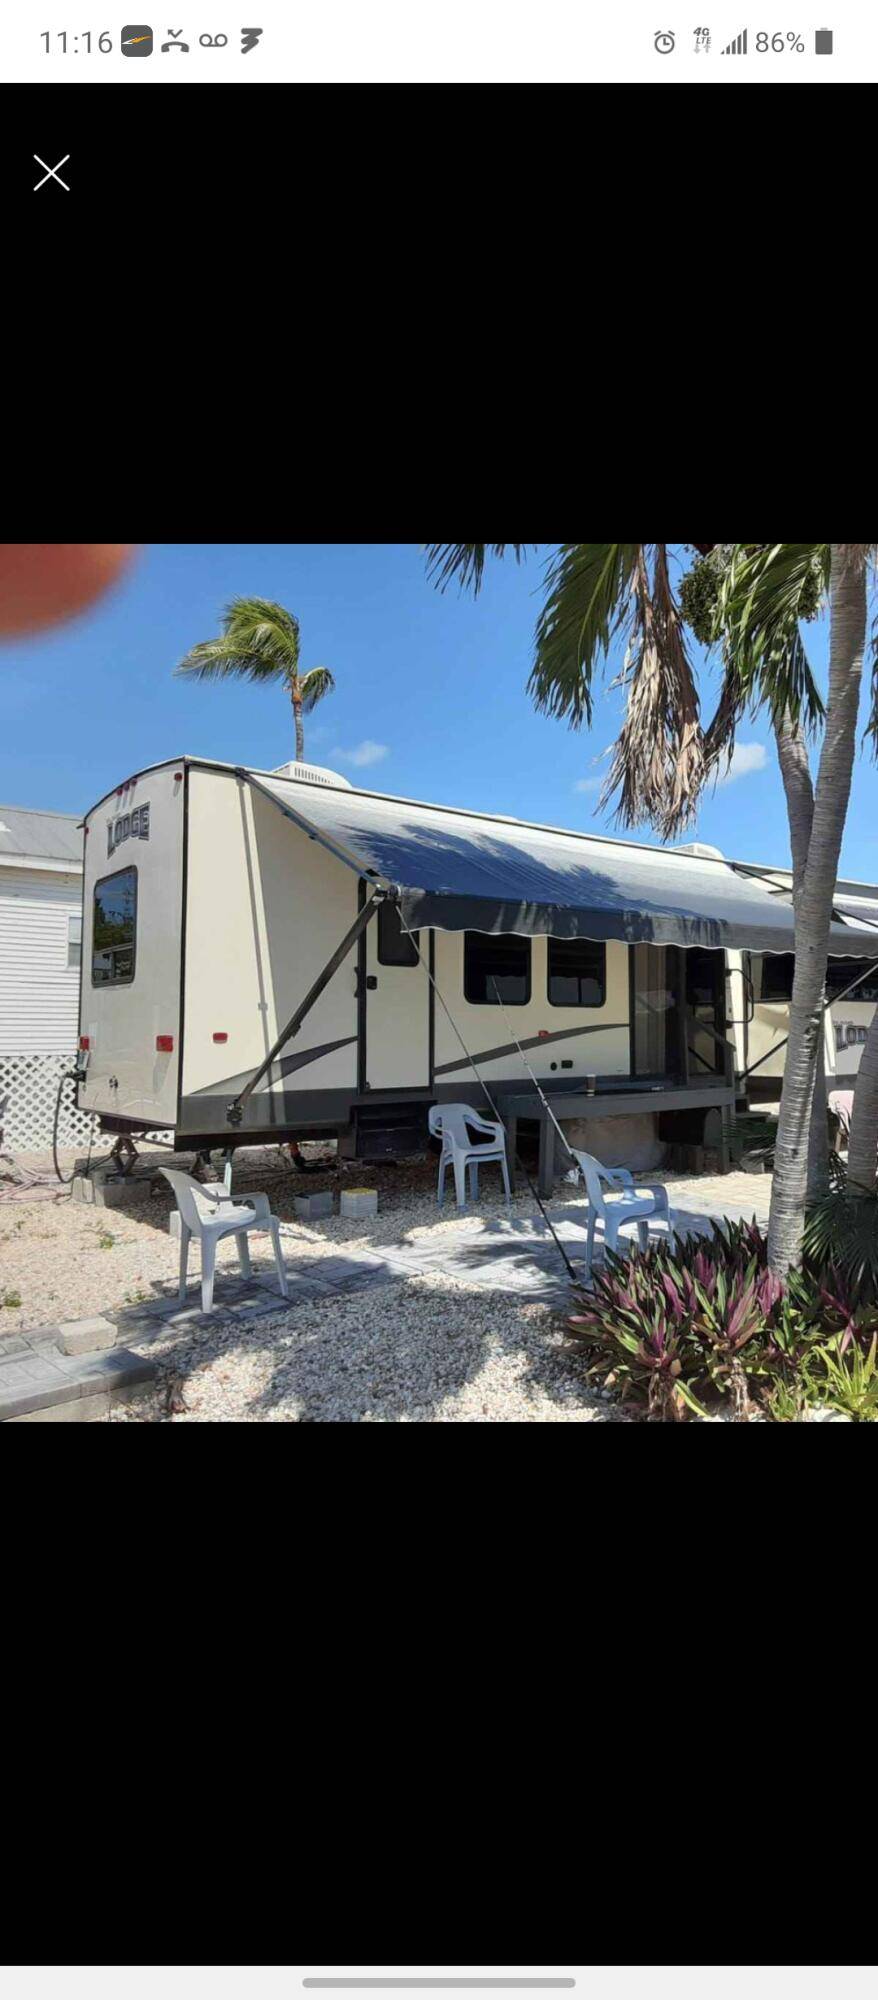 Do you want to live right on the ocean in Key Largo 2016 FOREST RIVER WILDWOOD LODGE 385FLBH Destination Trailer and Shed Note Lot rent is 1500 Per monthUnbranded Virtual ...